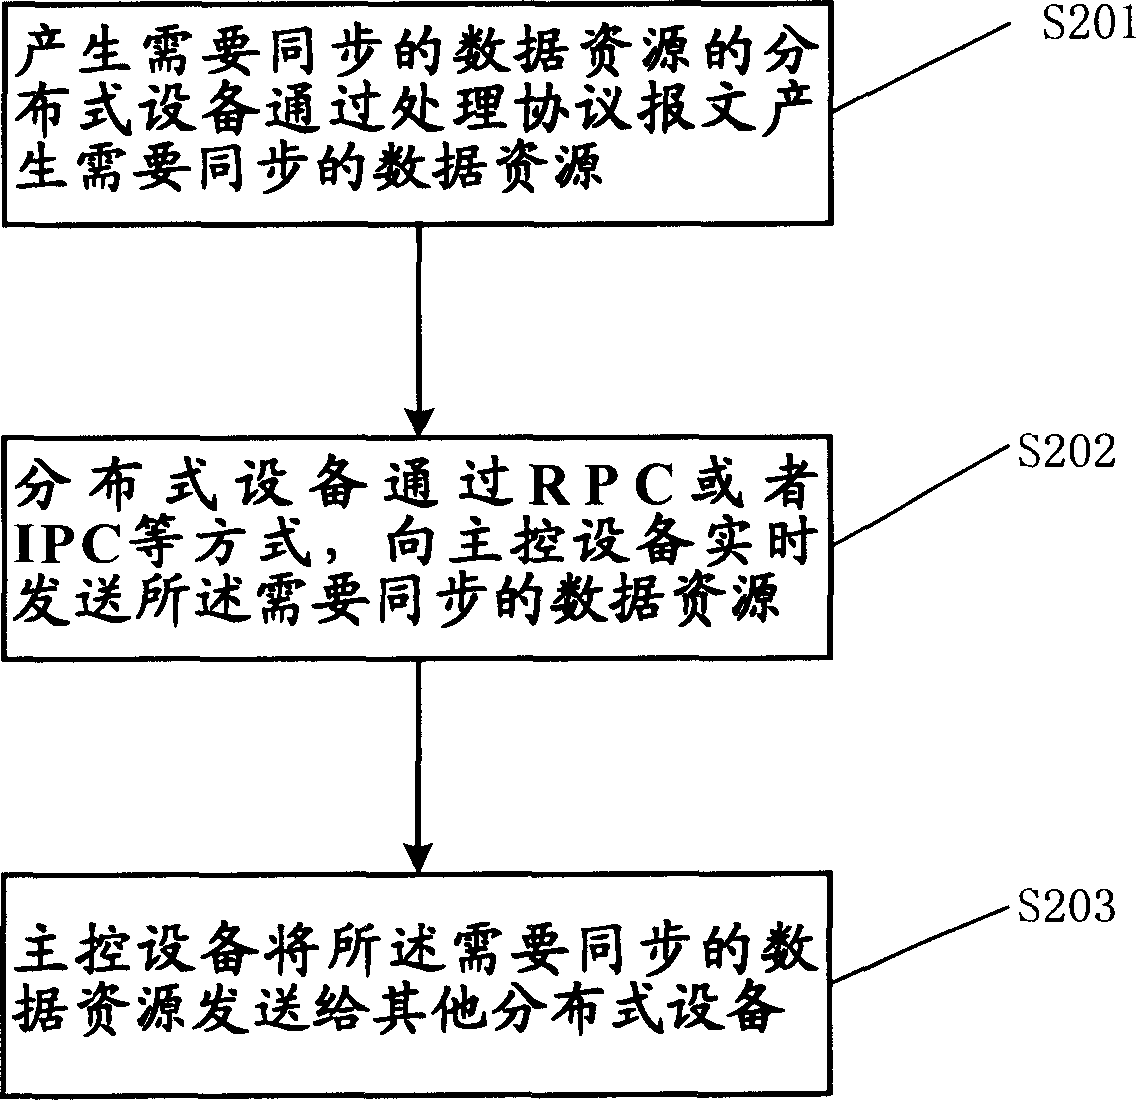 Method and apparatus for implementing data resources synchronization in distributed system